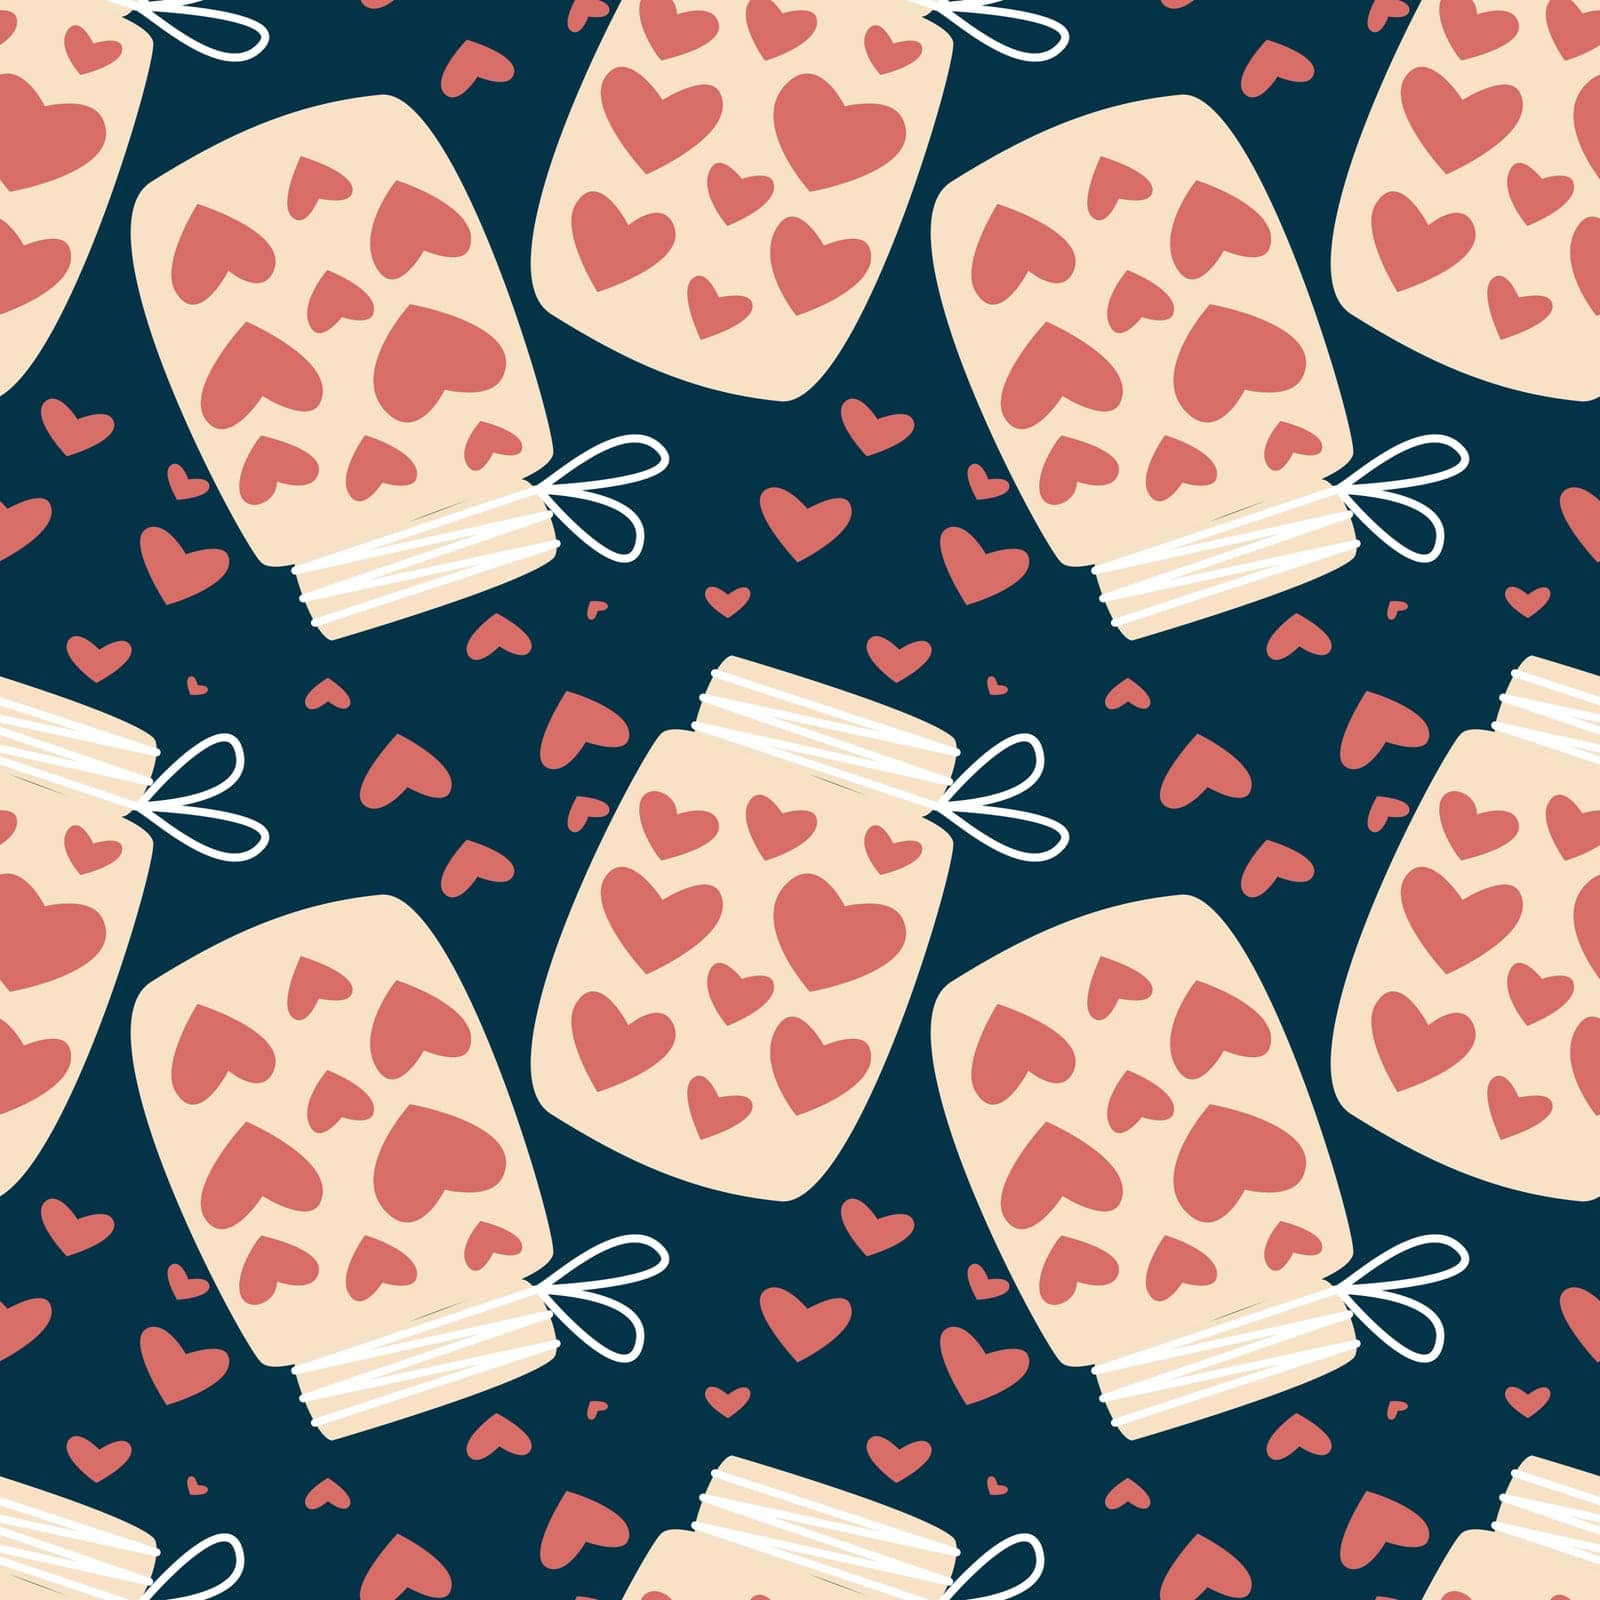 Hearts collected in jars seamless pattern. Romantic background love concept. Valentine s day print, vector illustration